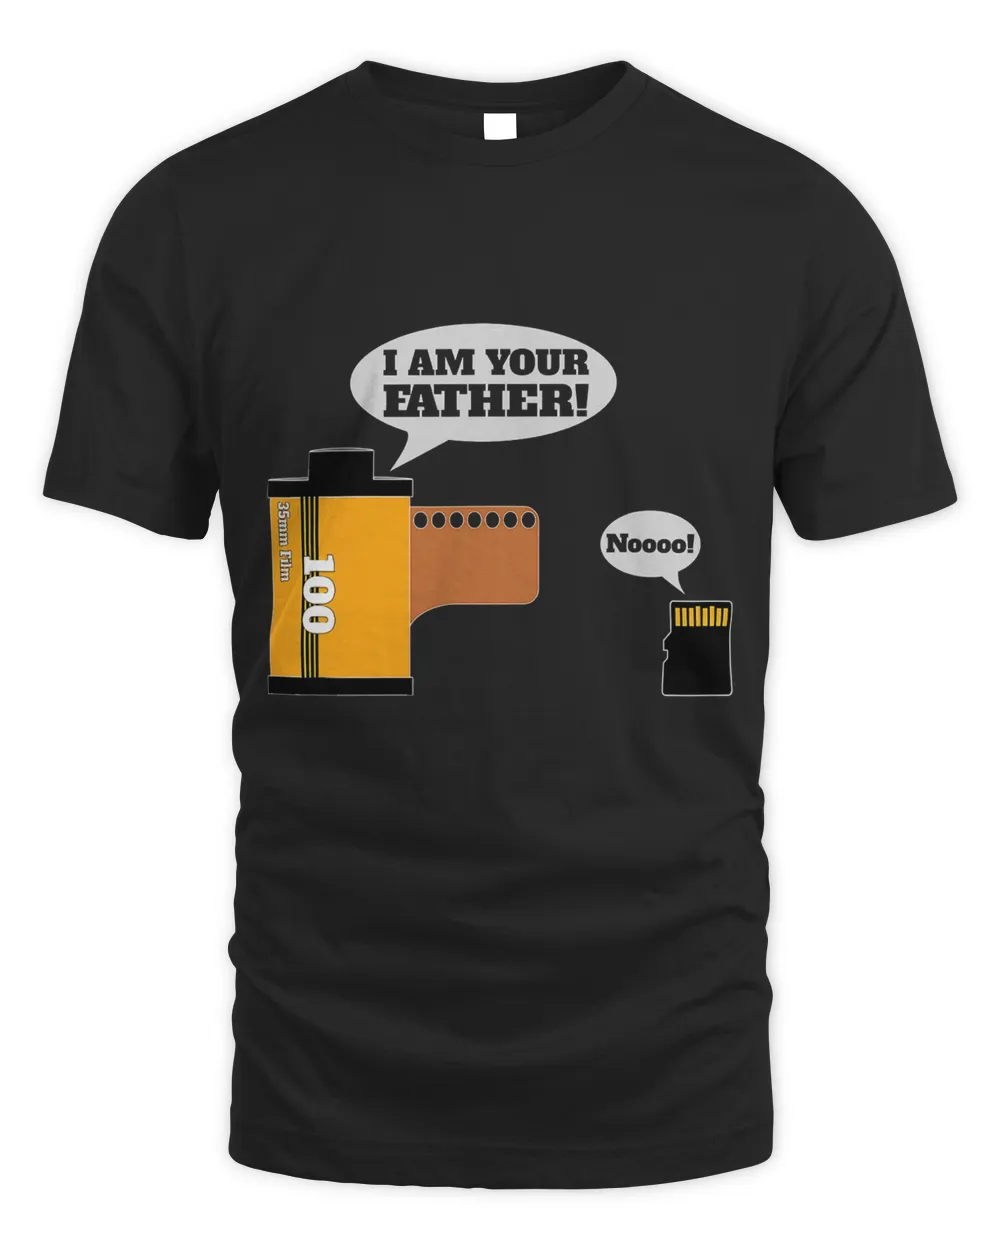 Funny Photography Shirt For Photographers Film And SD Card T-Shirt